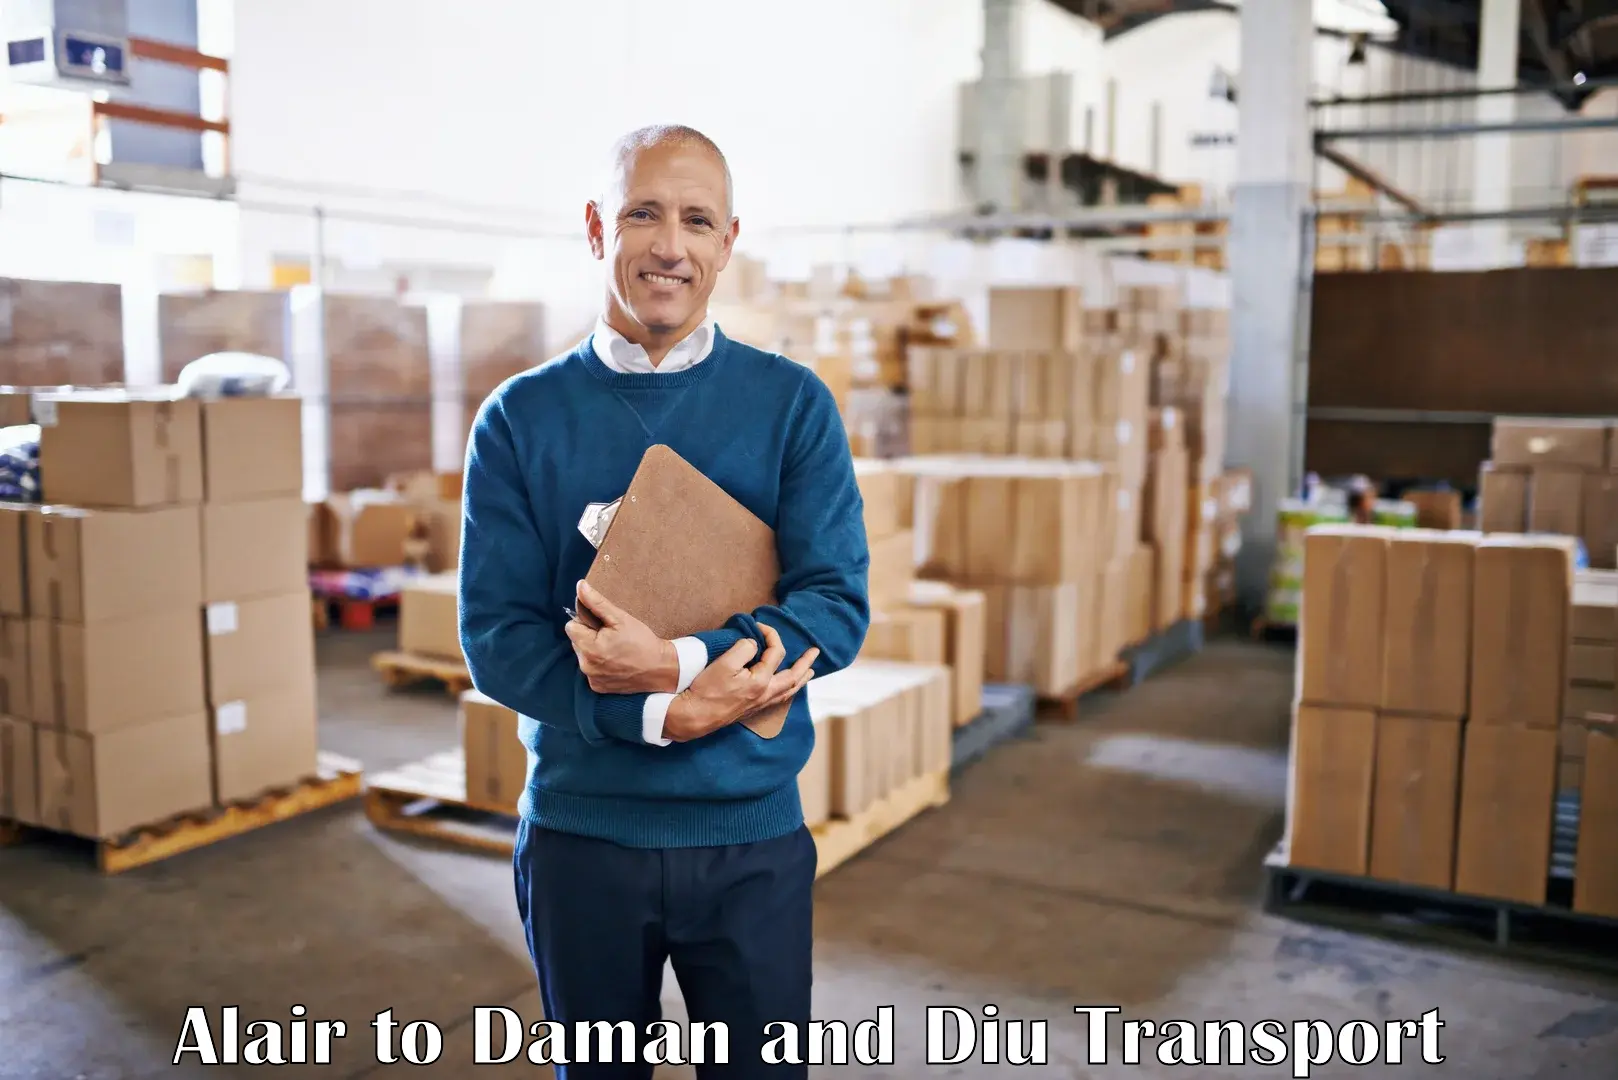 Domestic transport services Alair to Daman and Diu